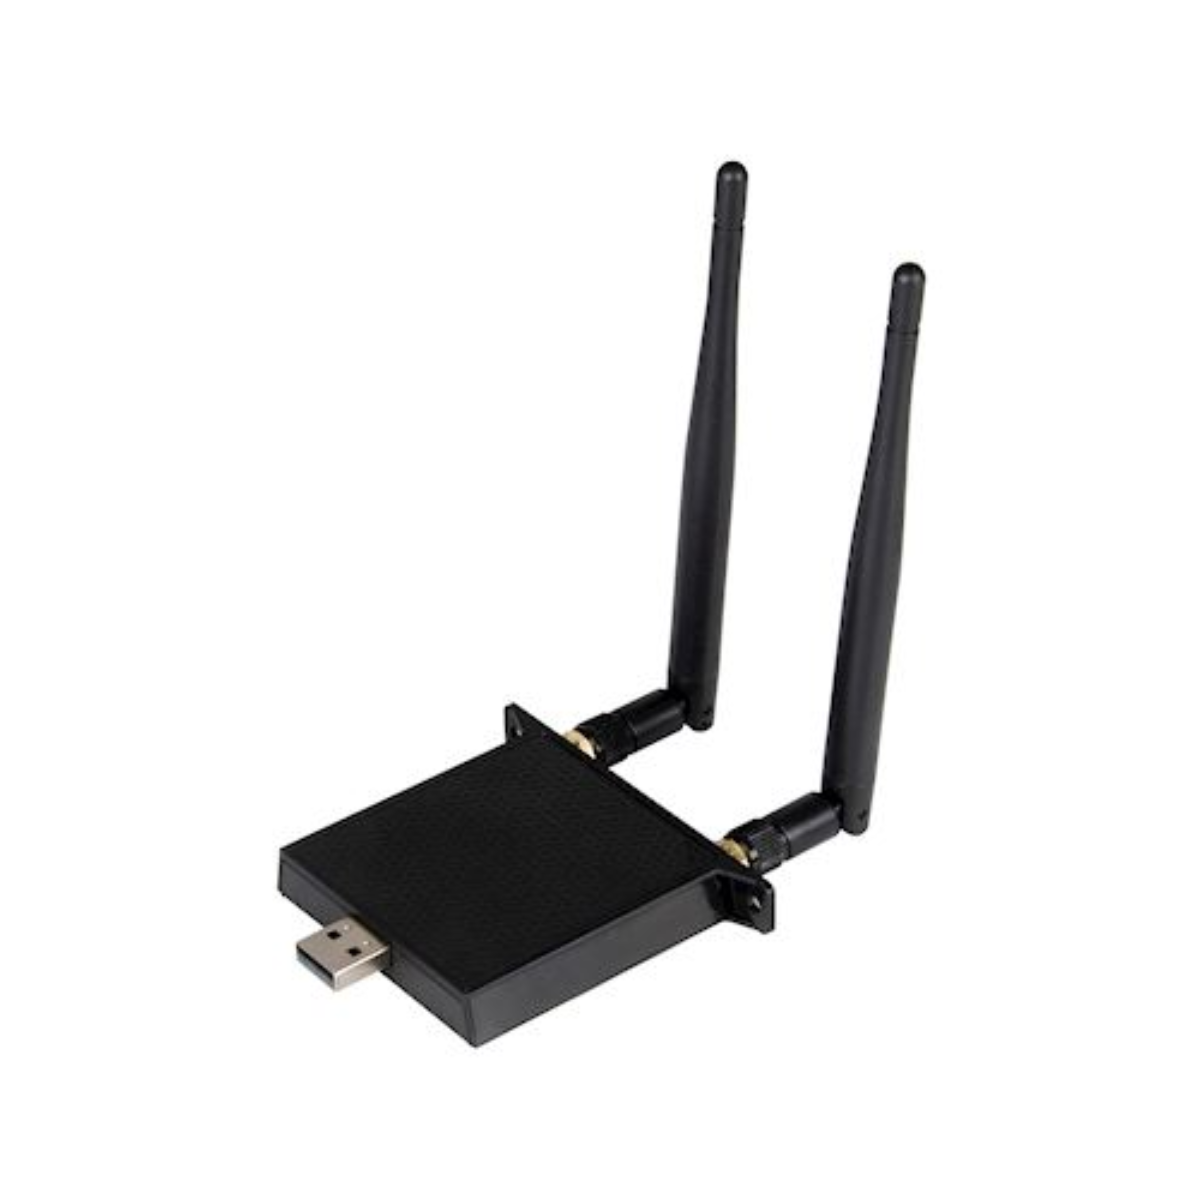 Modulo Wifi 2,4 / 5 Ghz Dual band. Bluetooth 4.0 , compatible redes a/b/g/